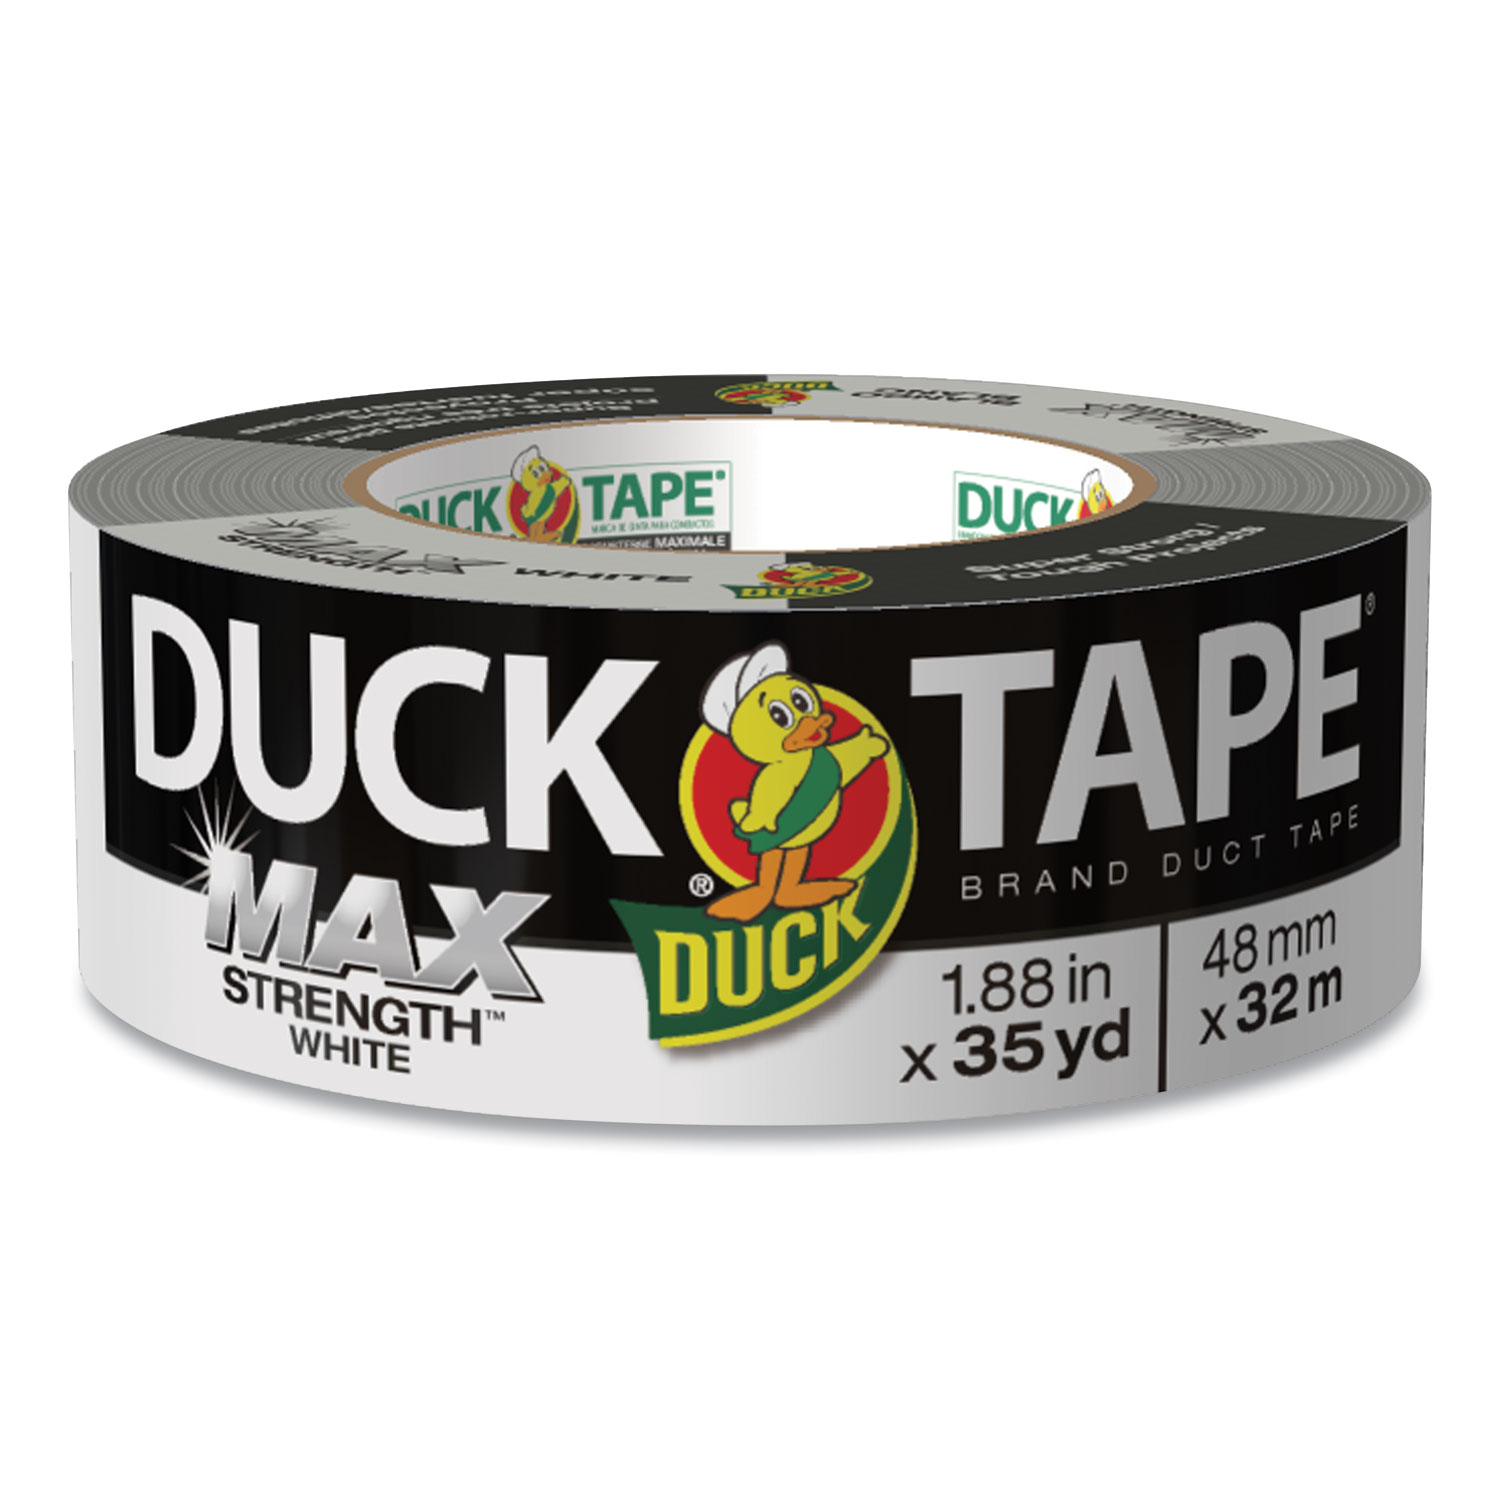  Duck 240866 MAX Duct Tape, 3 Core, 1.88 x 35 yds, White (DUC240866) 